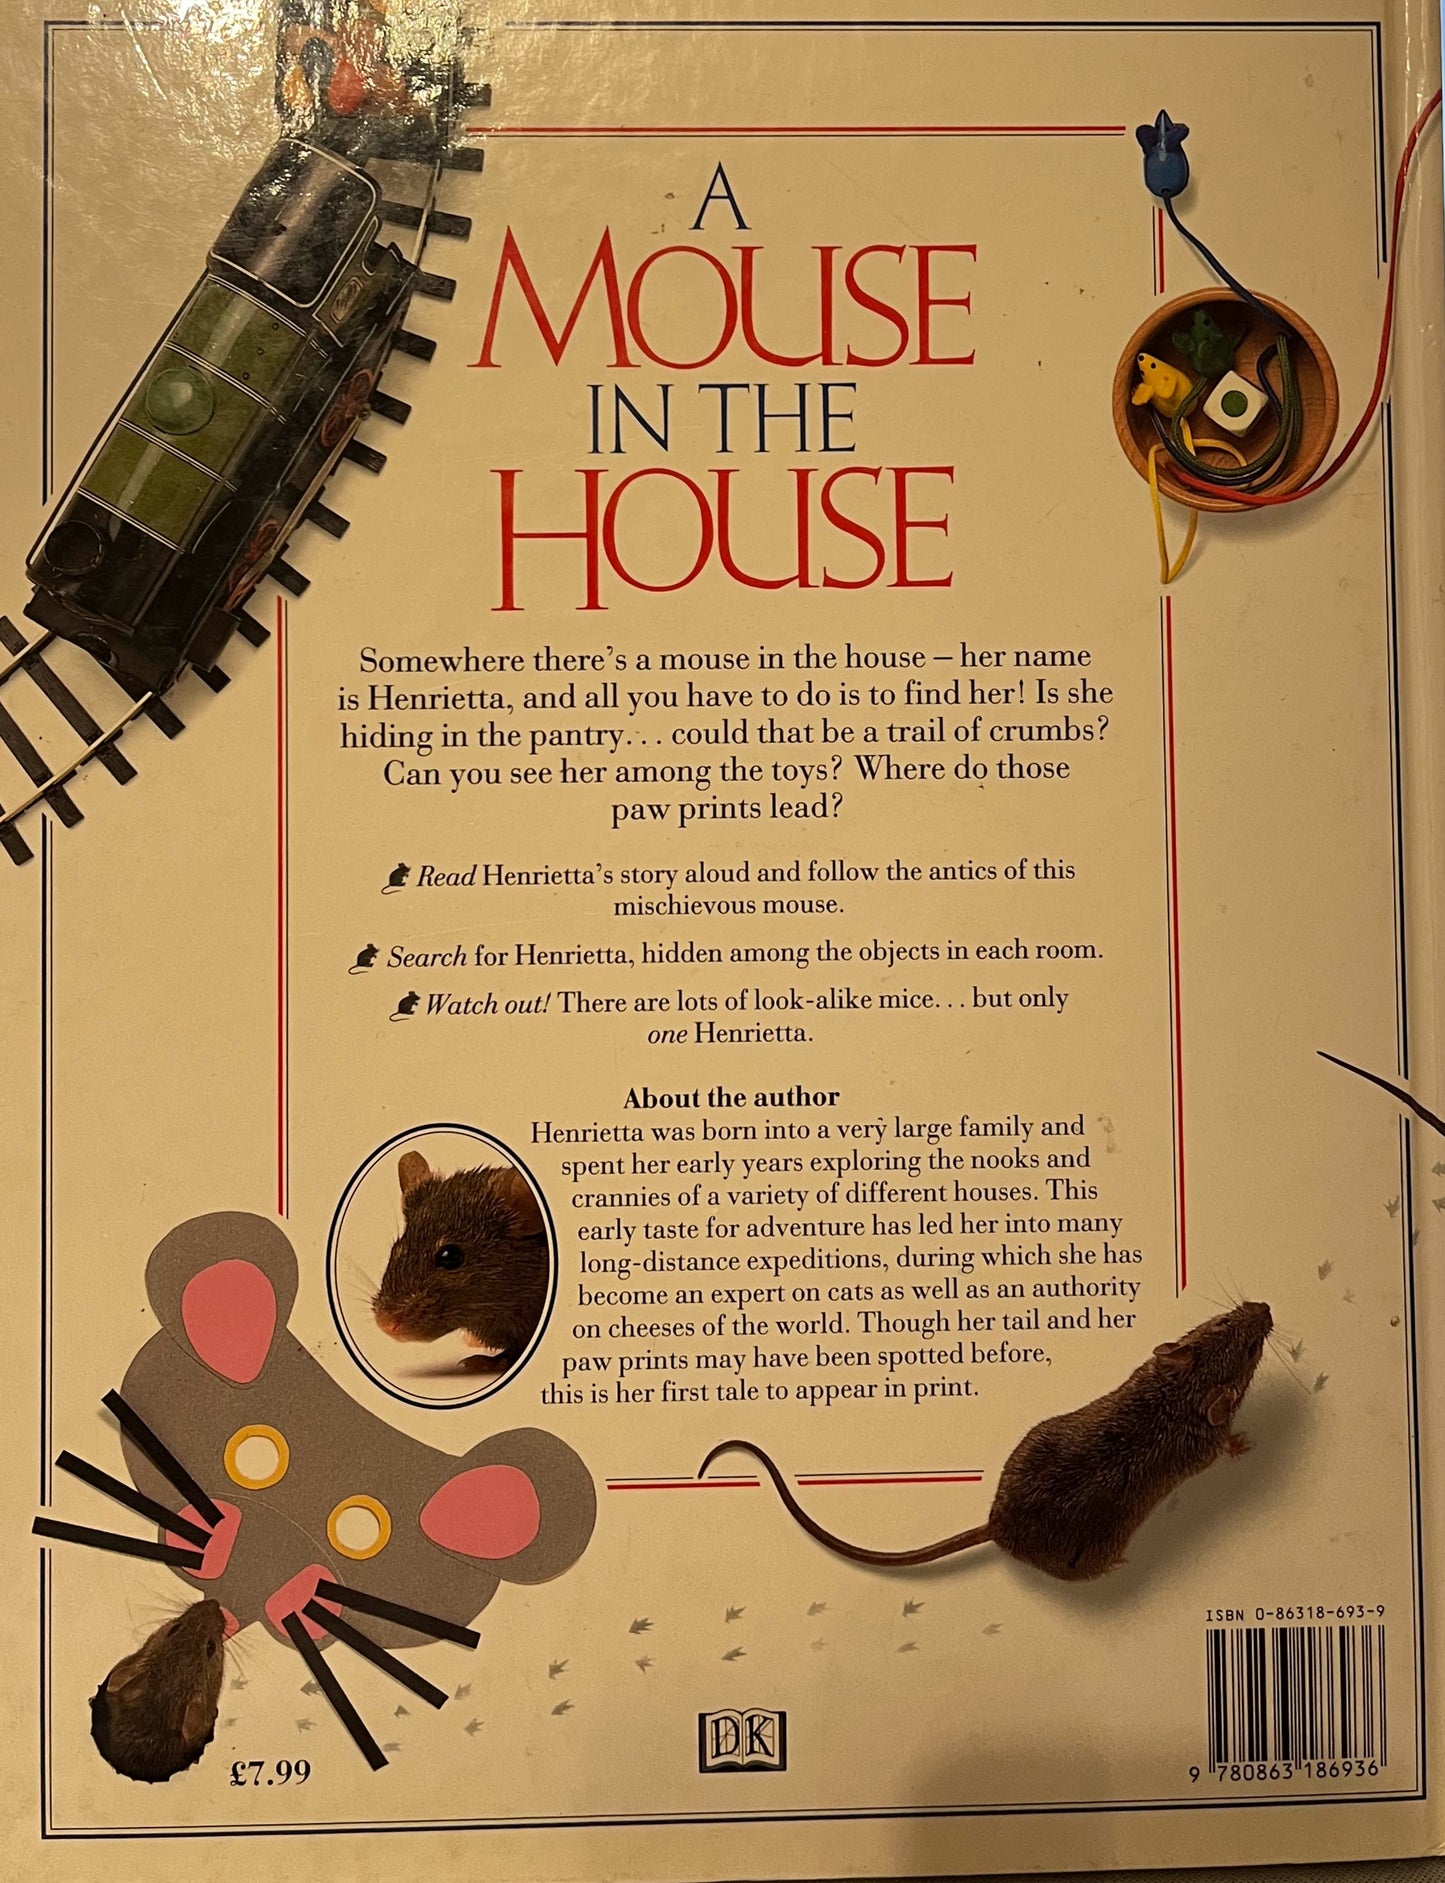 A Mouse in the house (8301055017177)